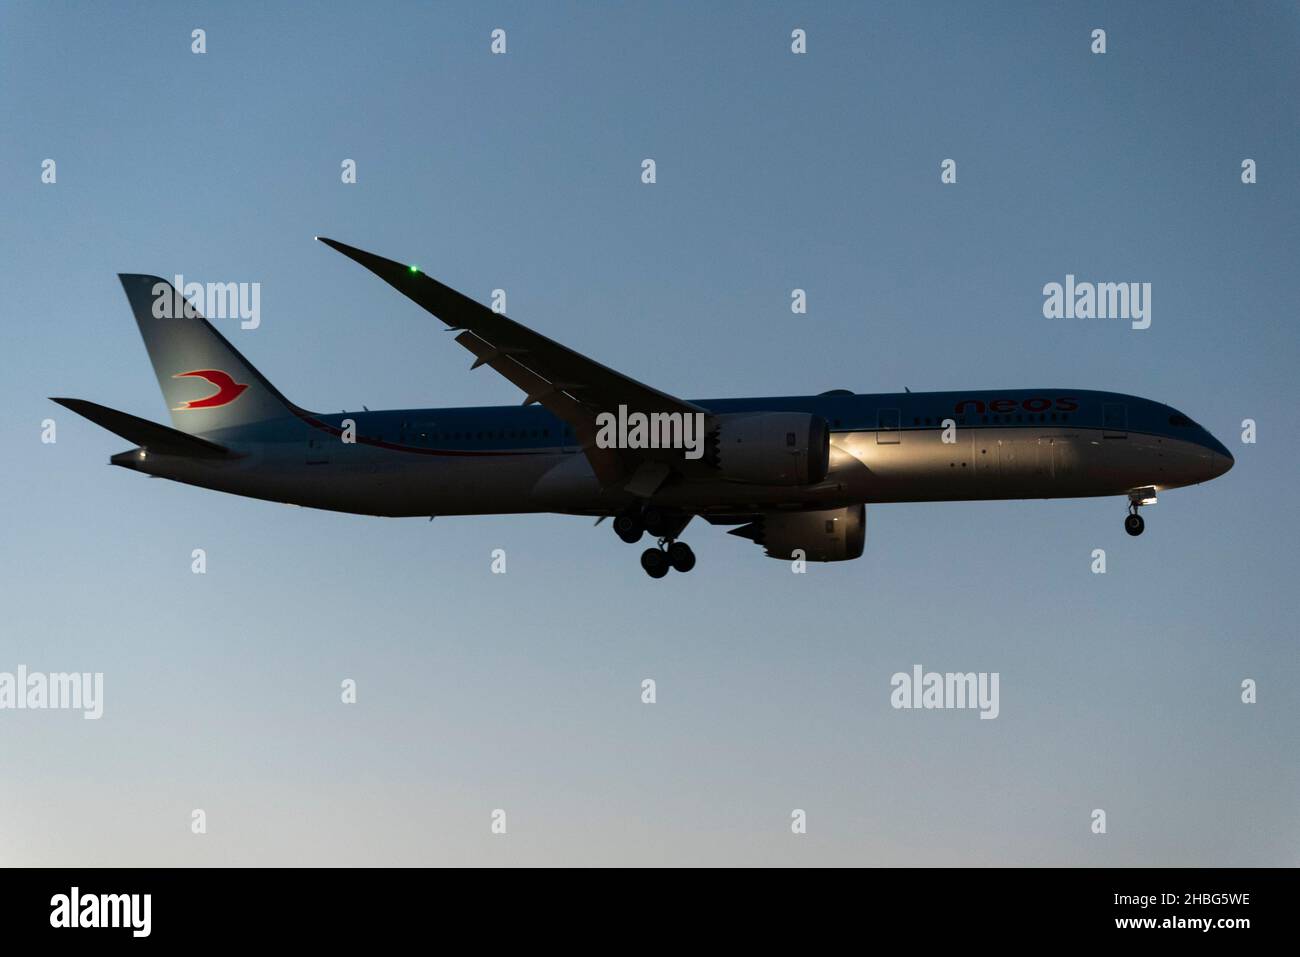 Neos Boeing 787 Dreamliner airliner plane on approach to land at London Heathrow Airport, UK, in clear dusk sky. Night arrival with Afghan refugees Stock Photo